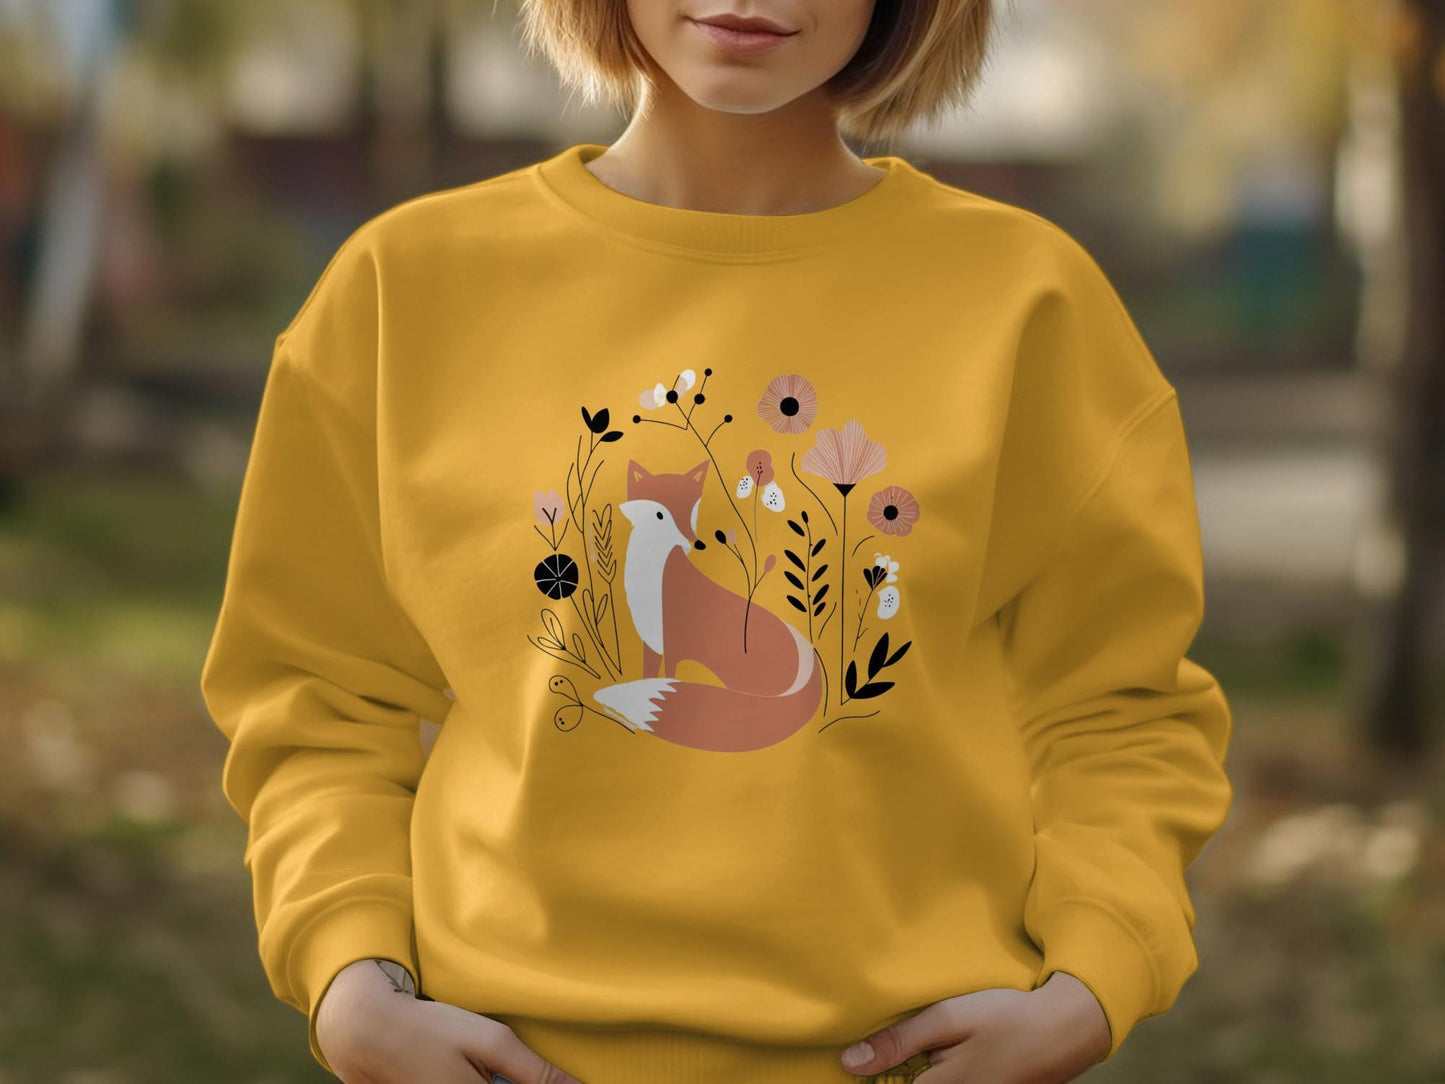 Chic Cottagecore Fox Sweatshirt - Floral Animal Lover Gift with Abstract Graphic Design